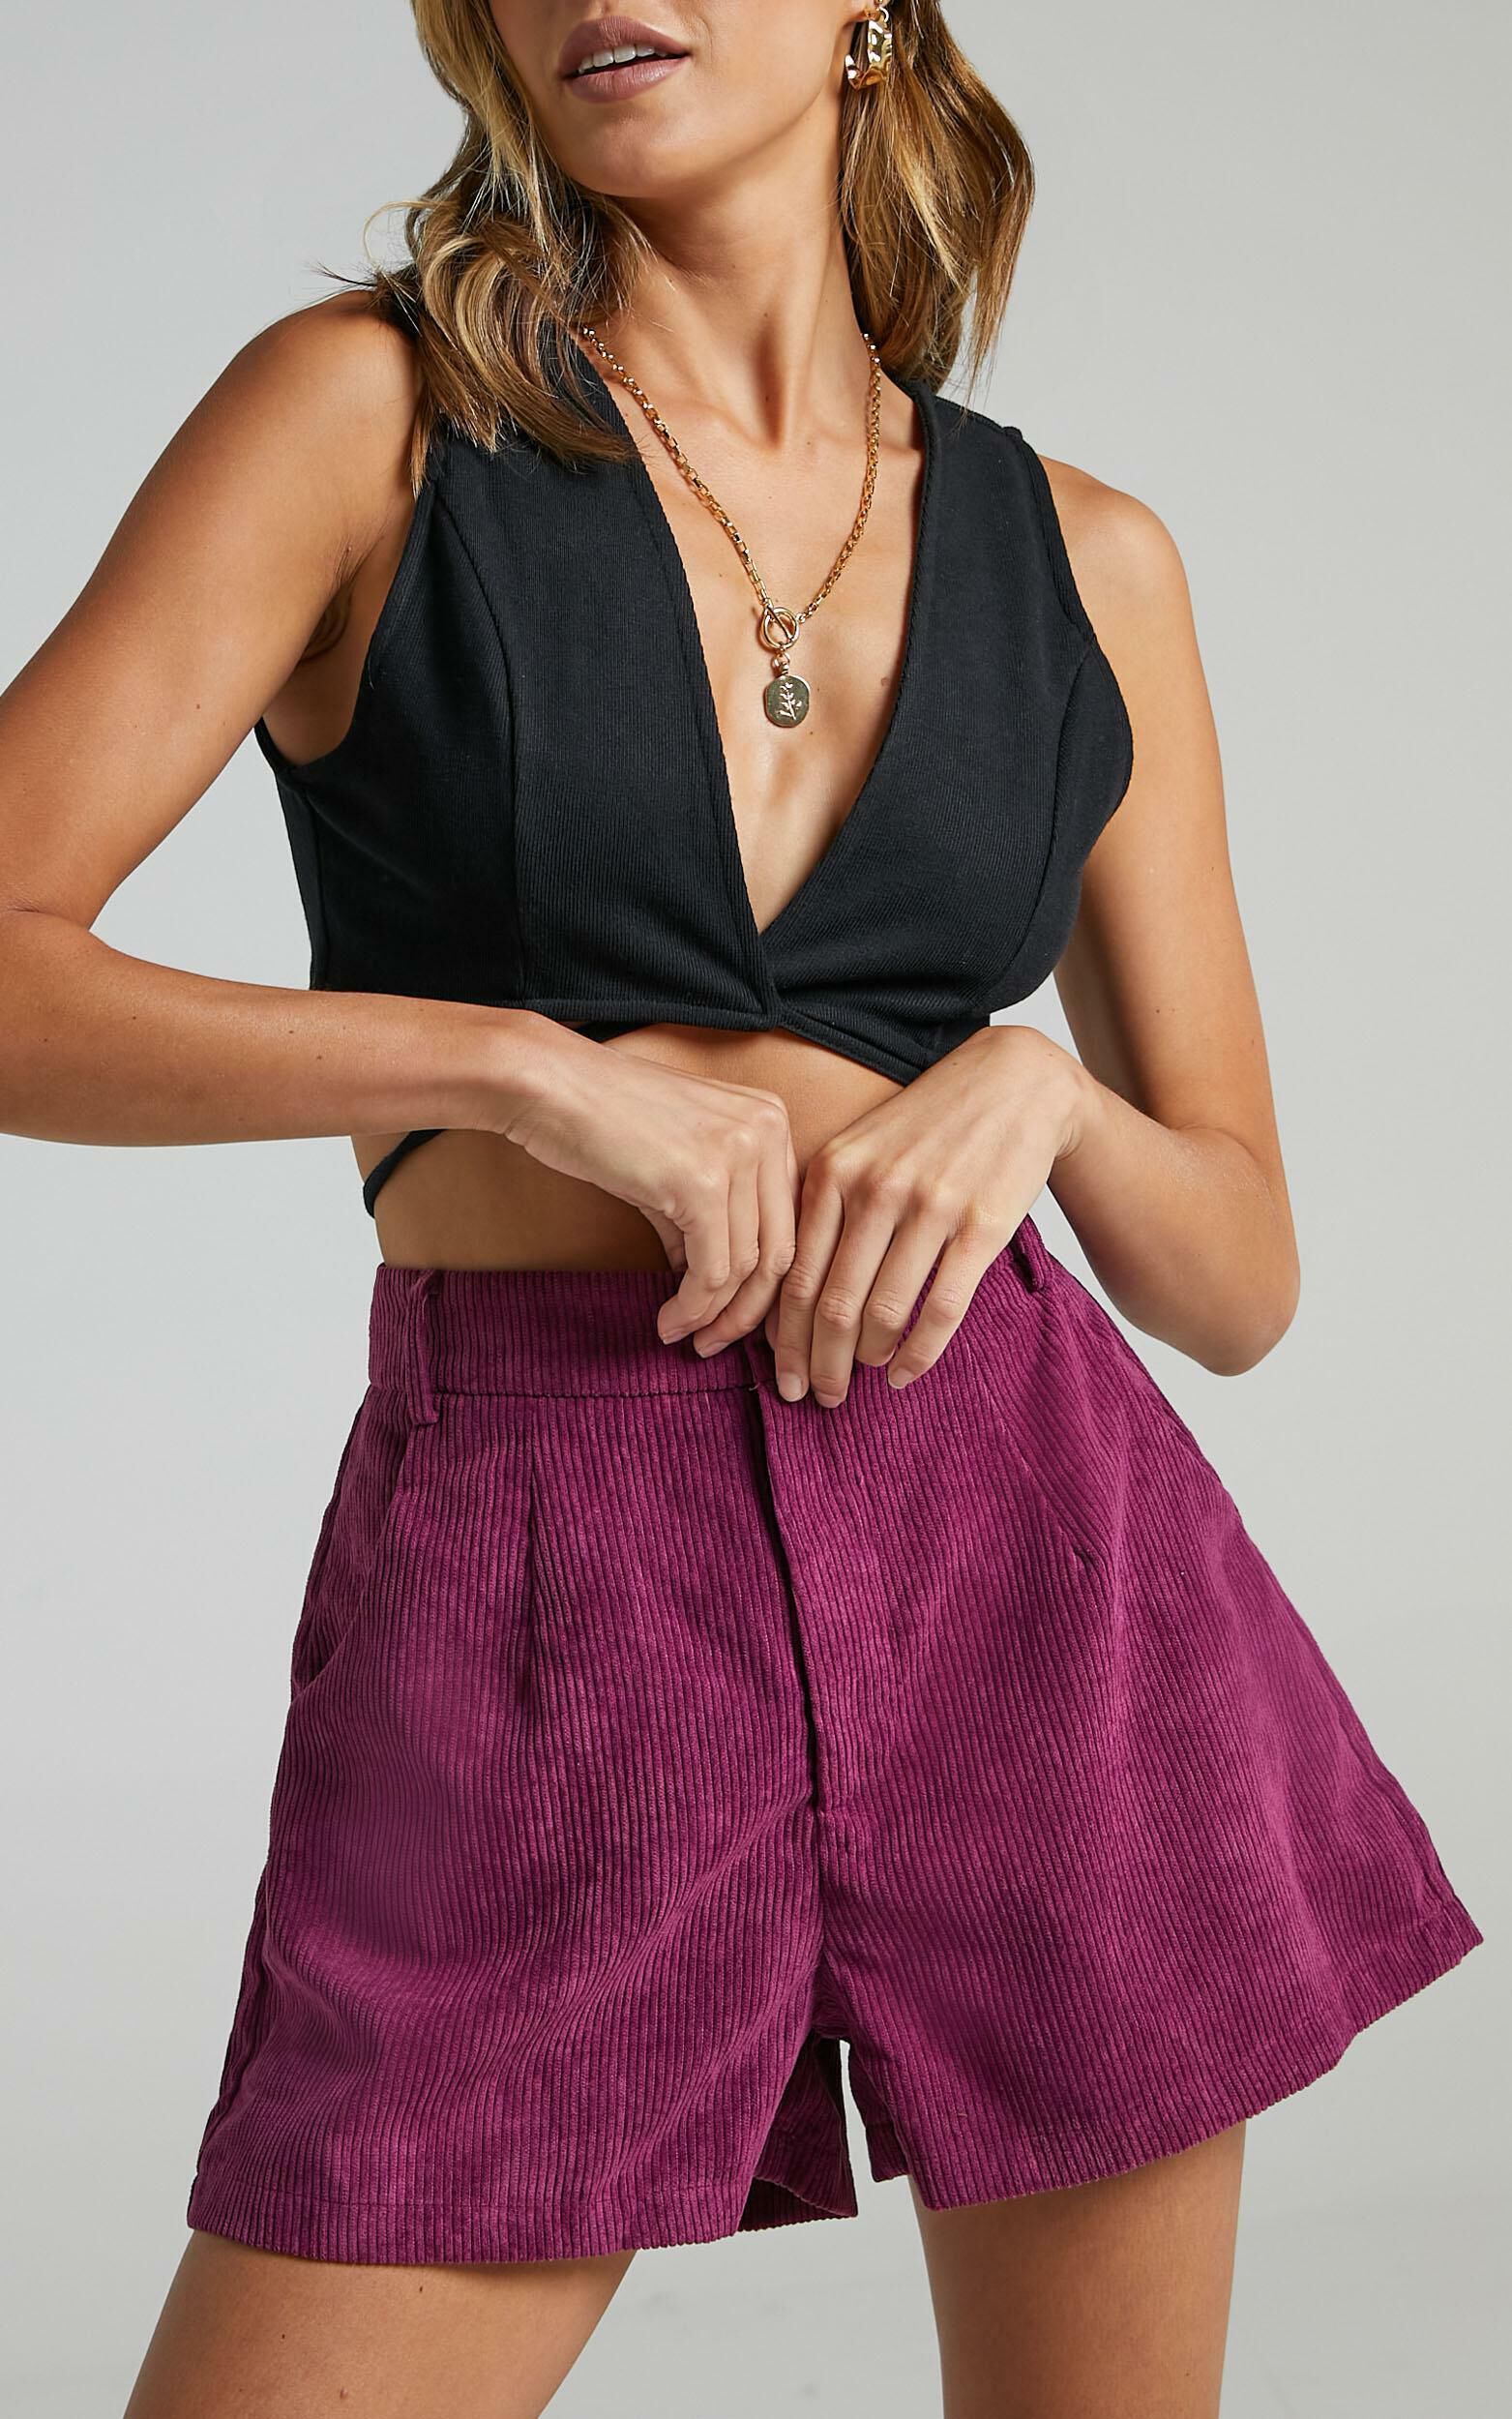 Tovil Shorts - High Waisted Corduroy Shorts in Mulberry - 06, PRP6